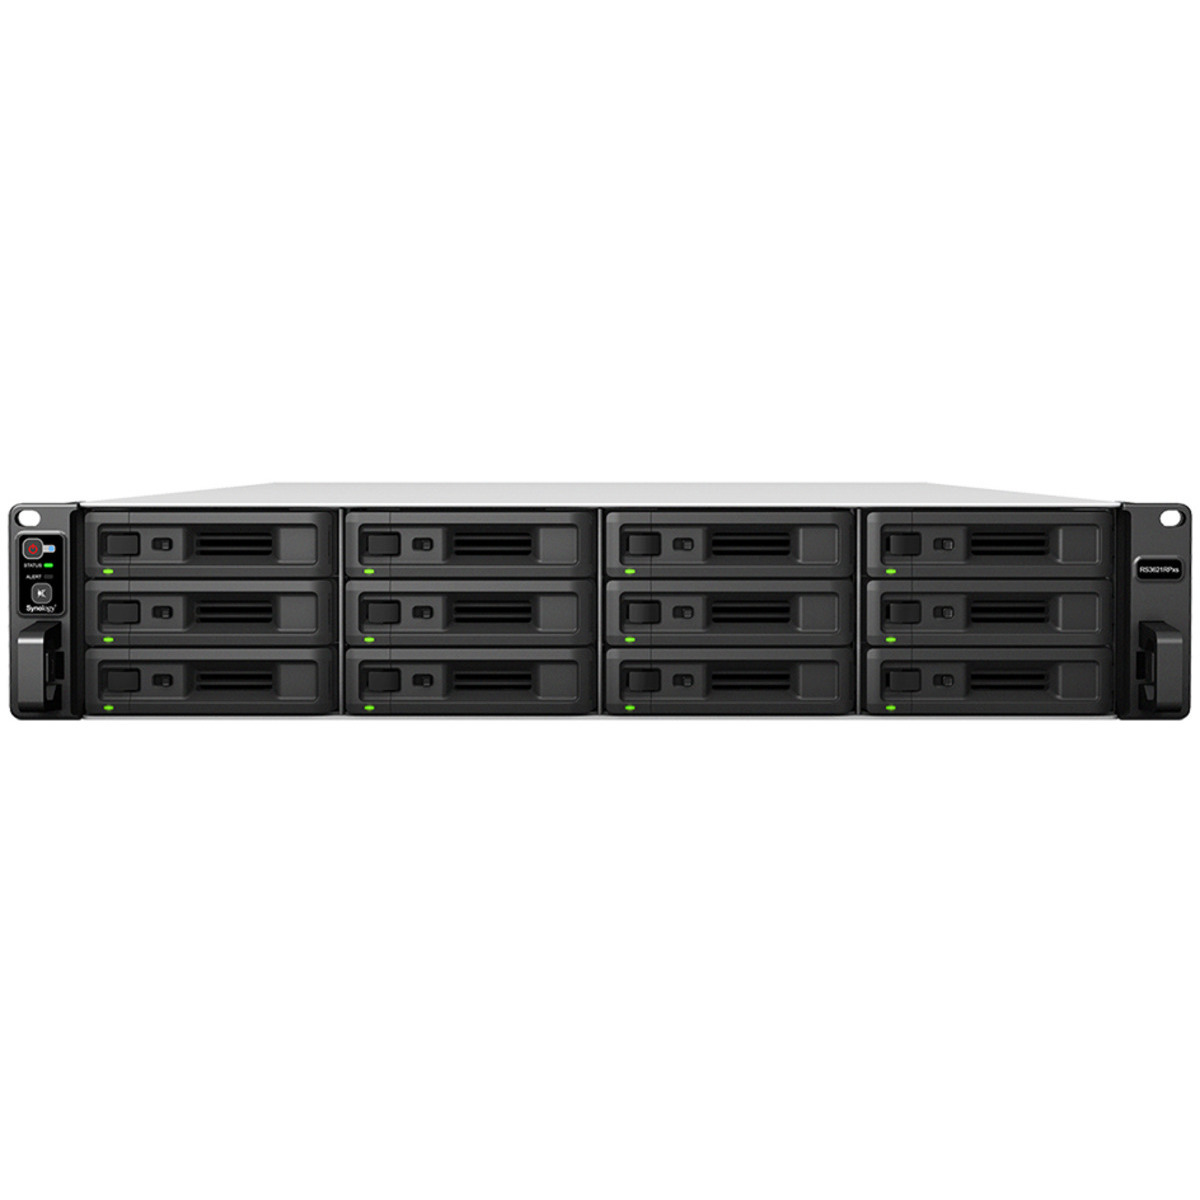 Synology RackStation RS3621RPxs 32tb 12-Bay RackMount Large Business / Enterprise NAS - Network Attached Storage Device 8x4tb Seagate EXOS 7E10 ST4000NM024B 3.5 7200rpm SATA 6Gb/s HDD ENTERPRISE Class Drives Installed - Burn-In Tested RackStation RS3621RPxs